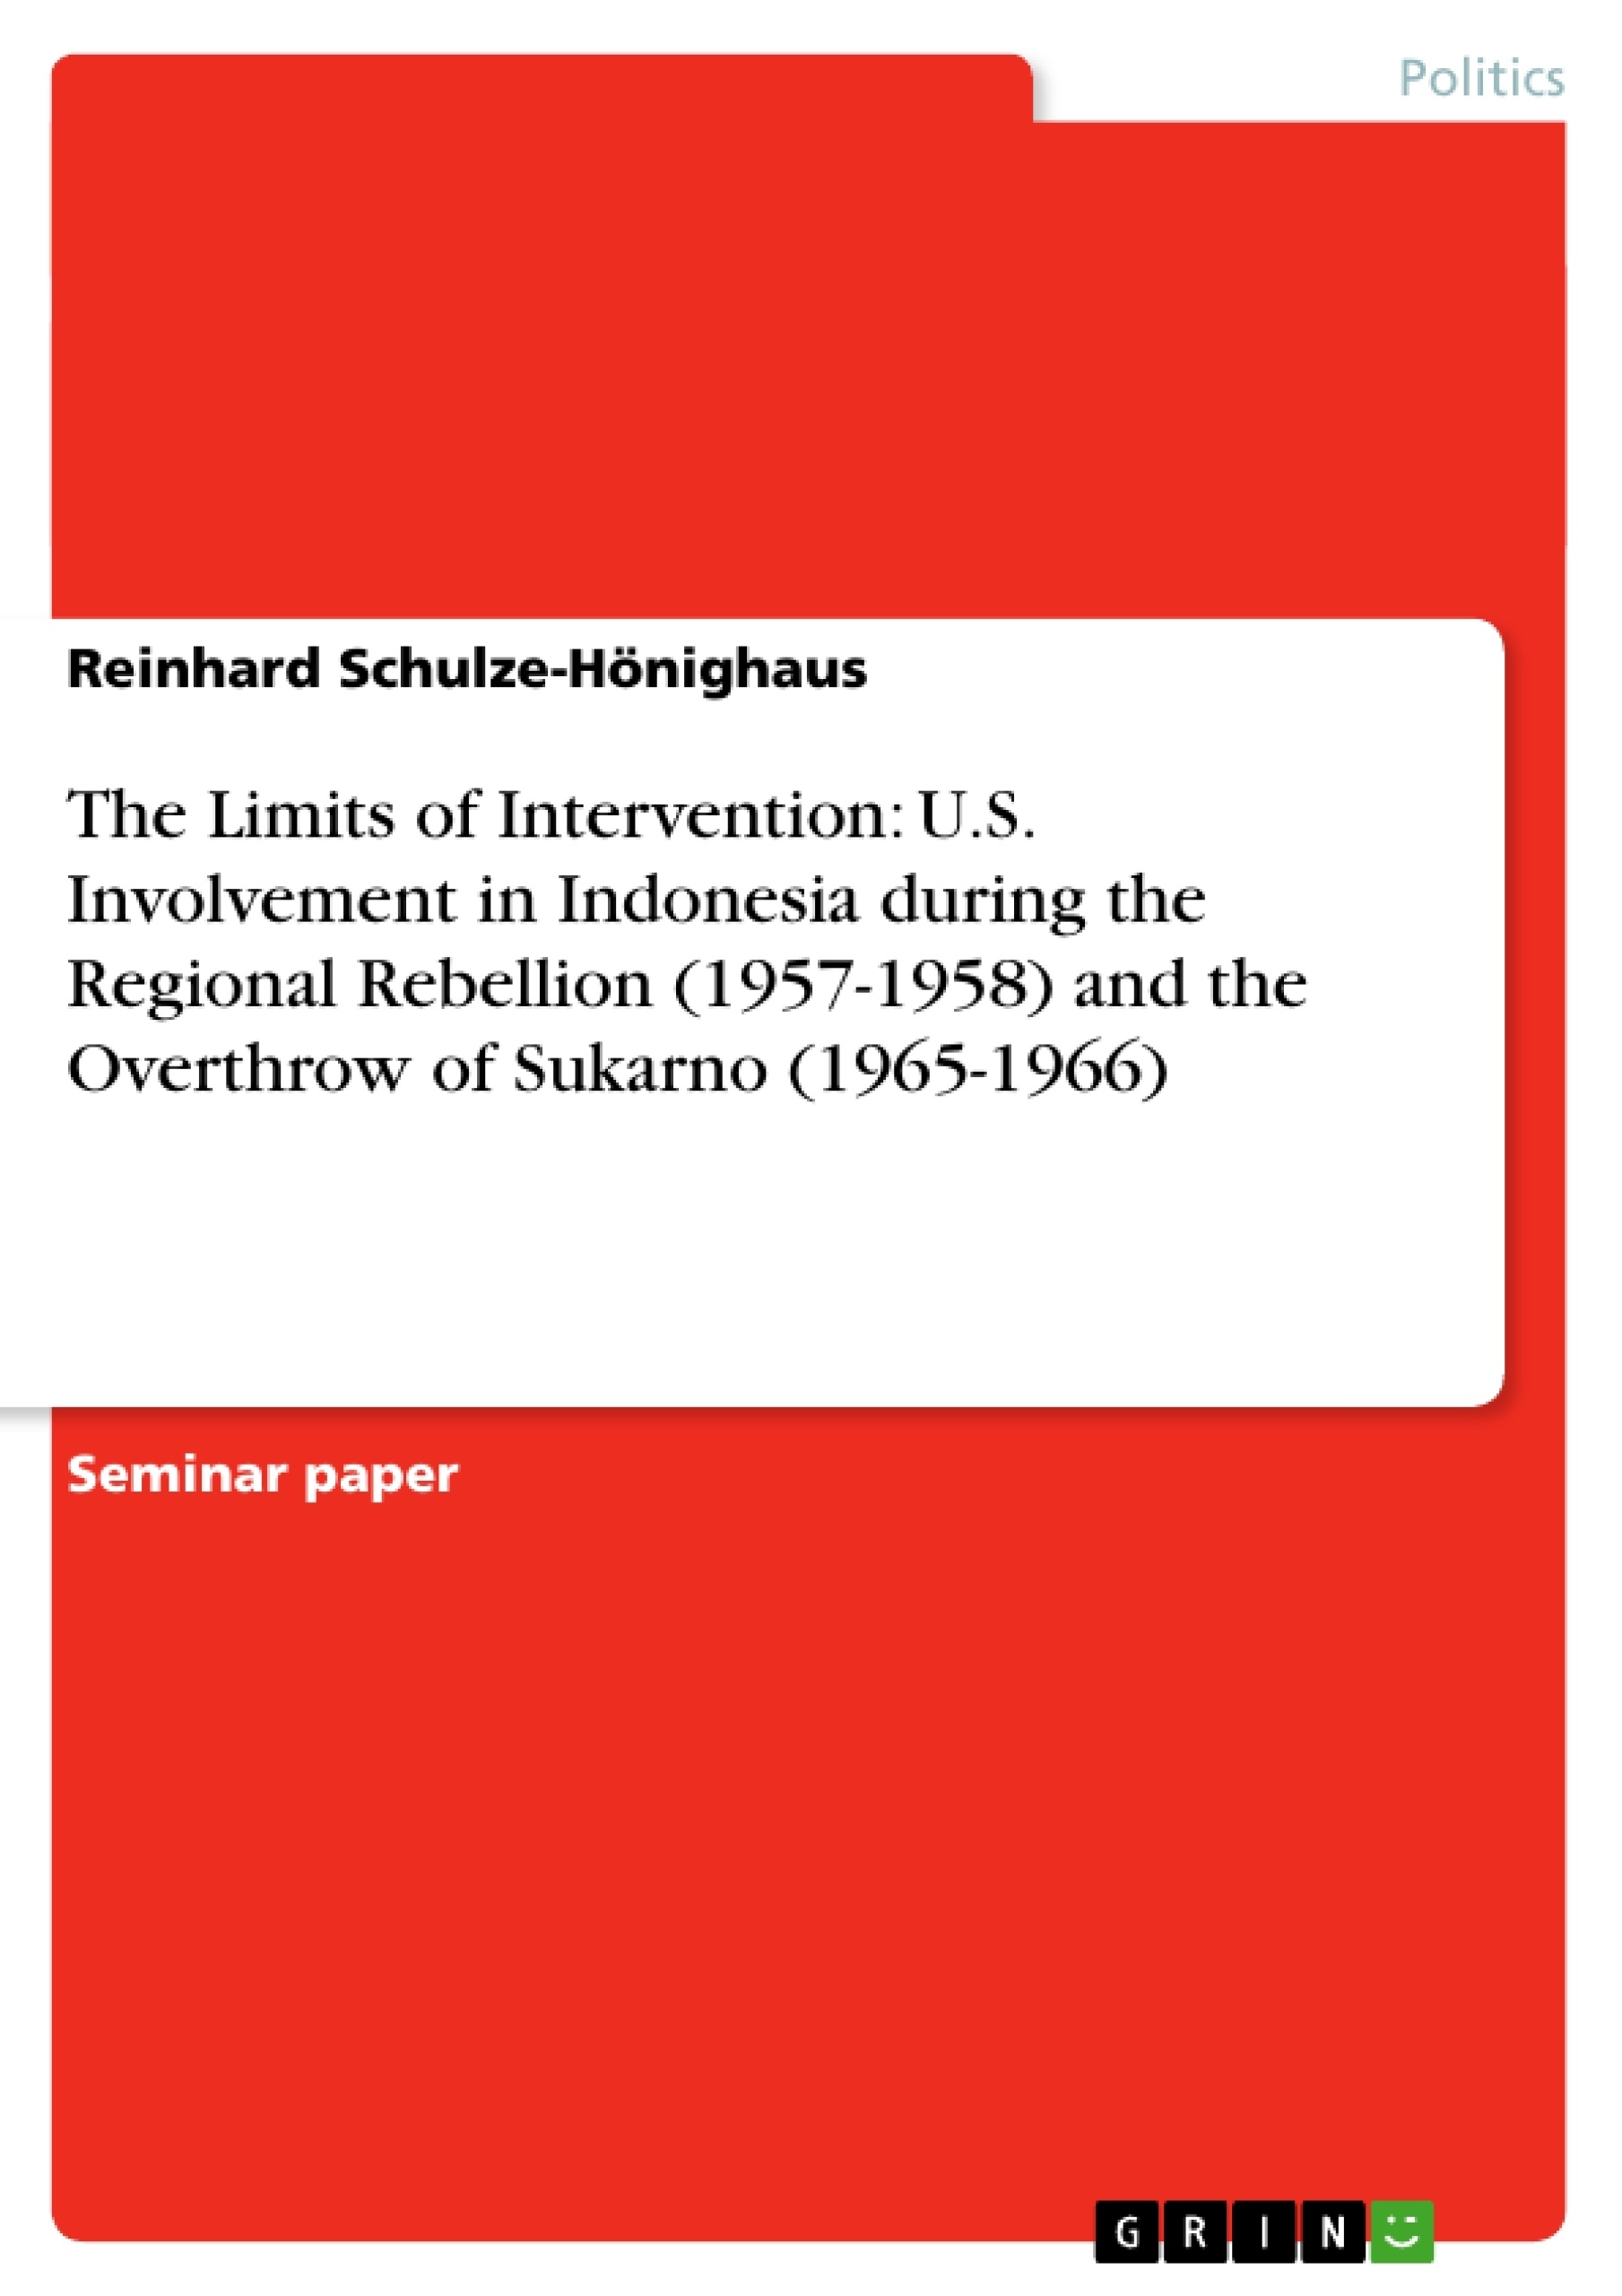 Título: The Limits of Intervention: U.S. Involvement in Indonesia during the Regional Rebellion (1957-1958) and the Overthrow of Sukarno (1965-1966)